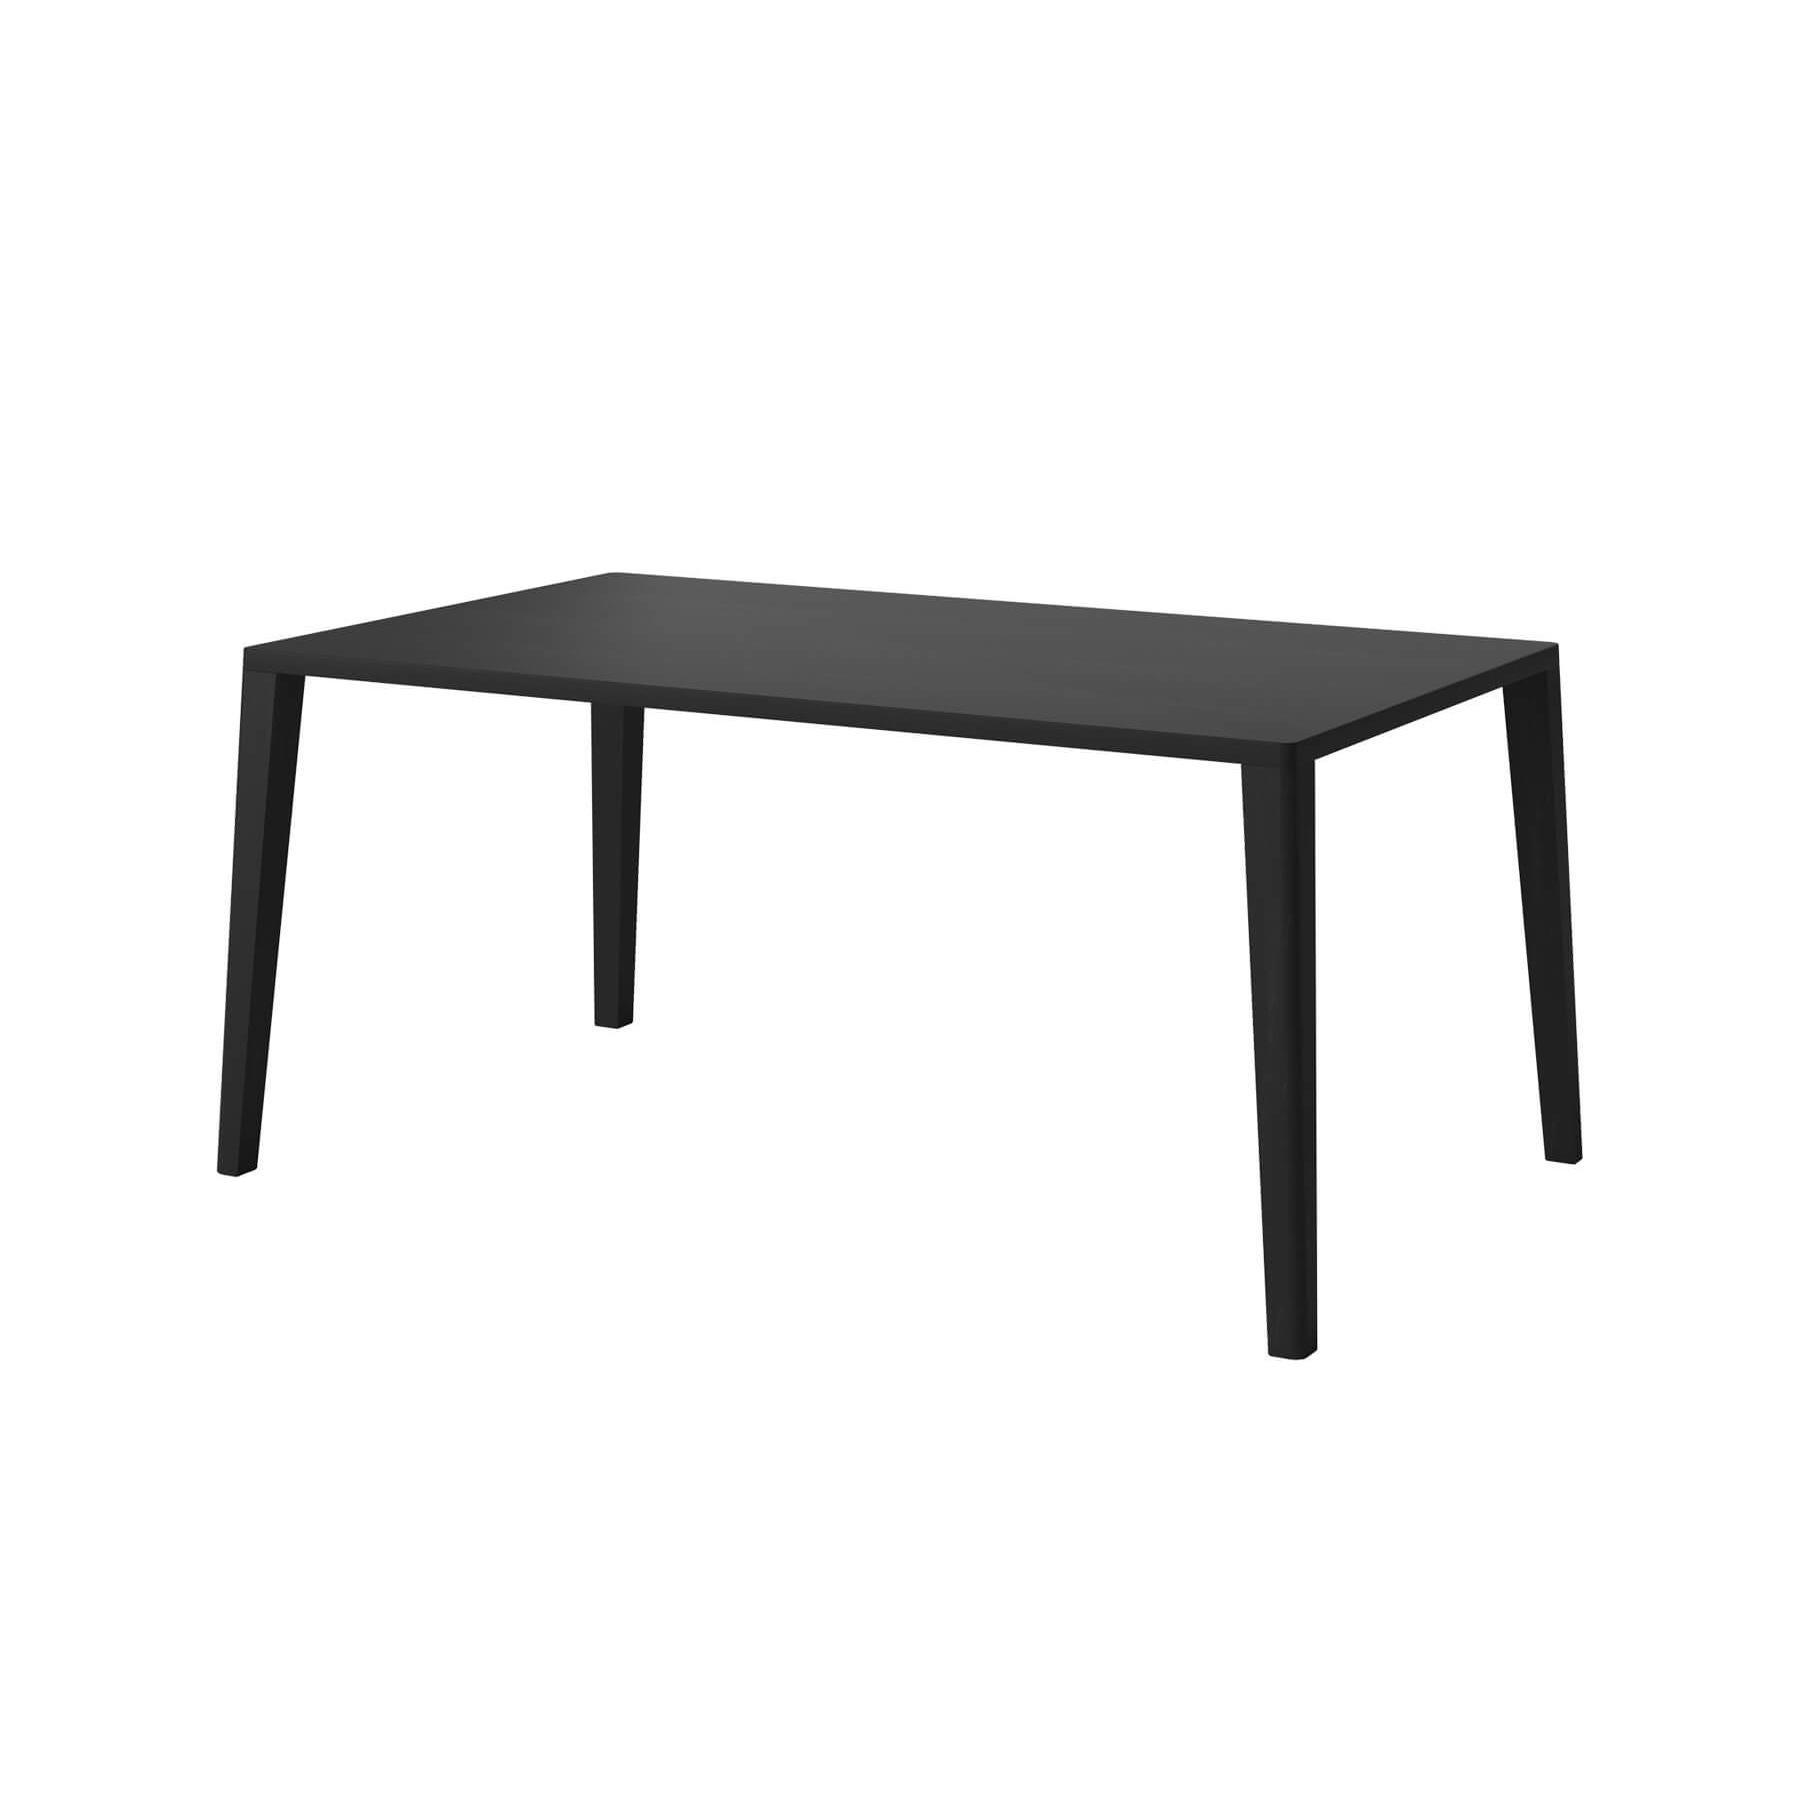 Bolia Graceful Dining Table 160 X 95cm Black Stained Legs Without Extension Leaves Designer Furniture From Holloways Of Ludlow